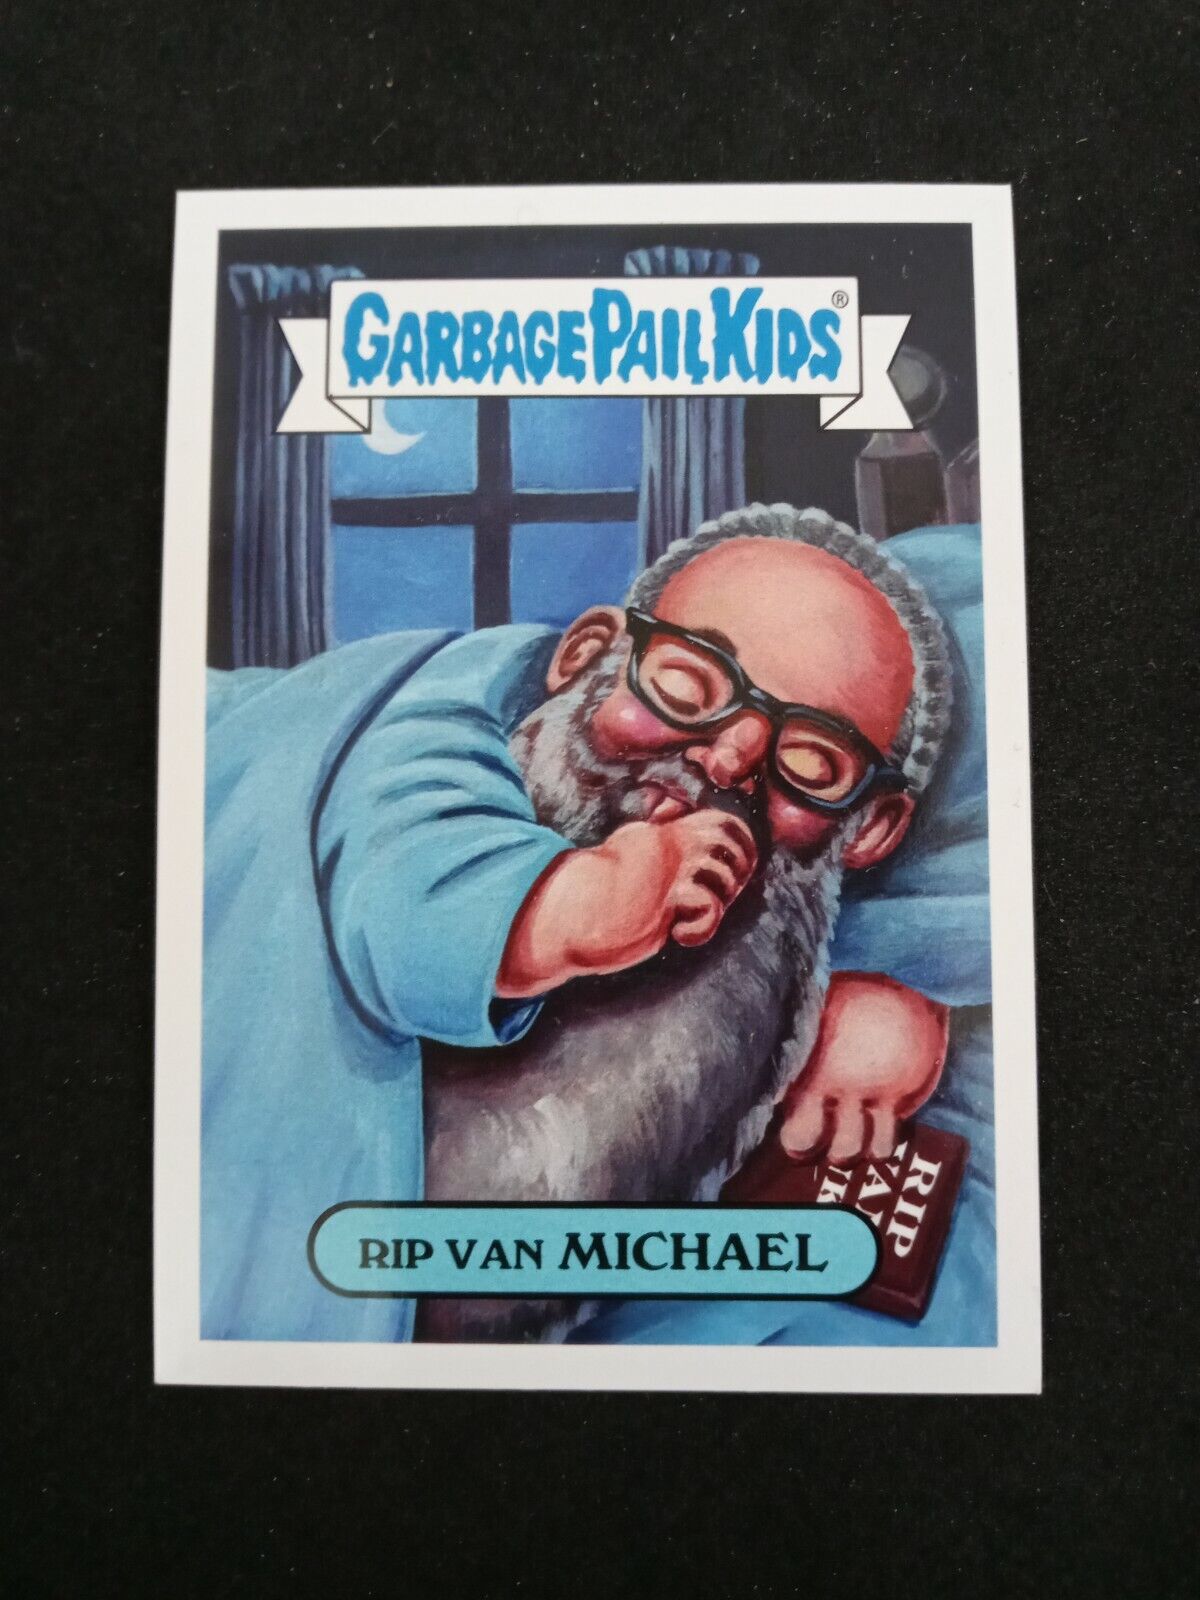 2017 Topps Garbage Pail Kids Battle Of The Bands Card Sticker (Your Pick Card)